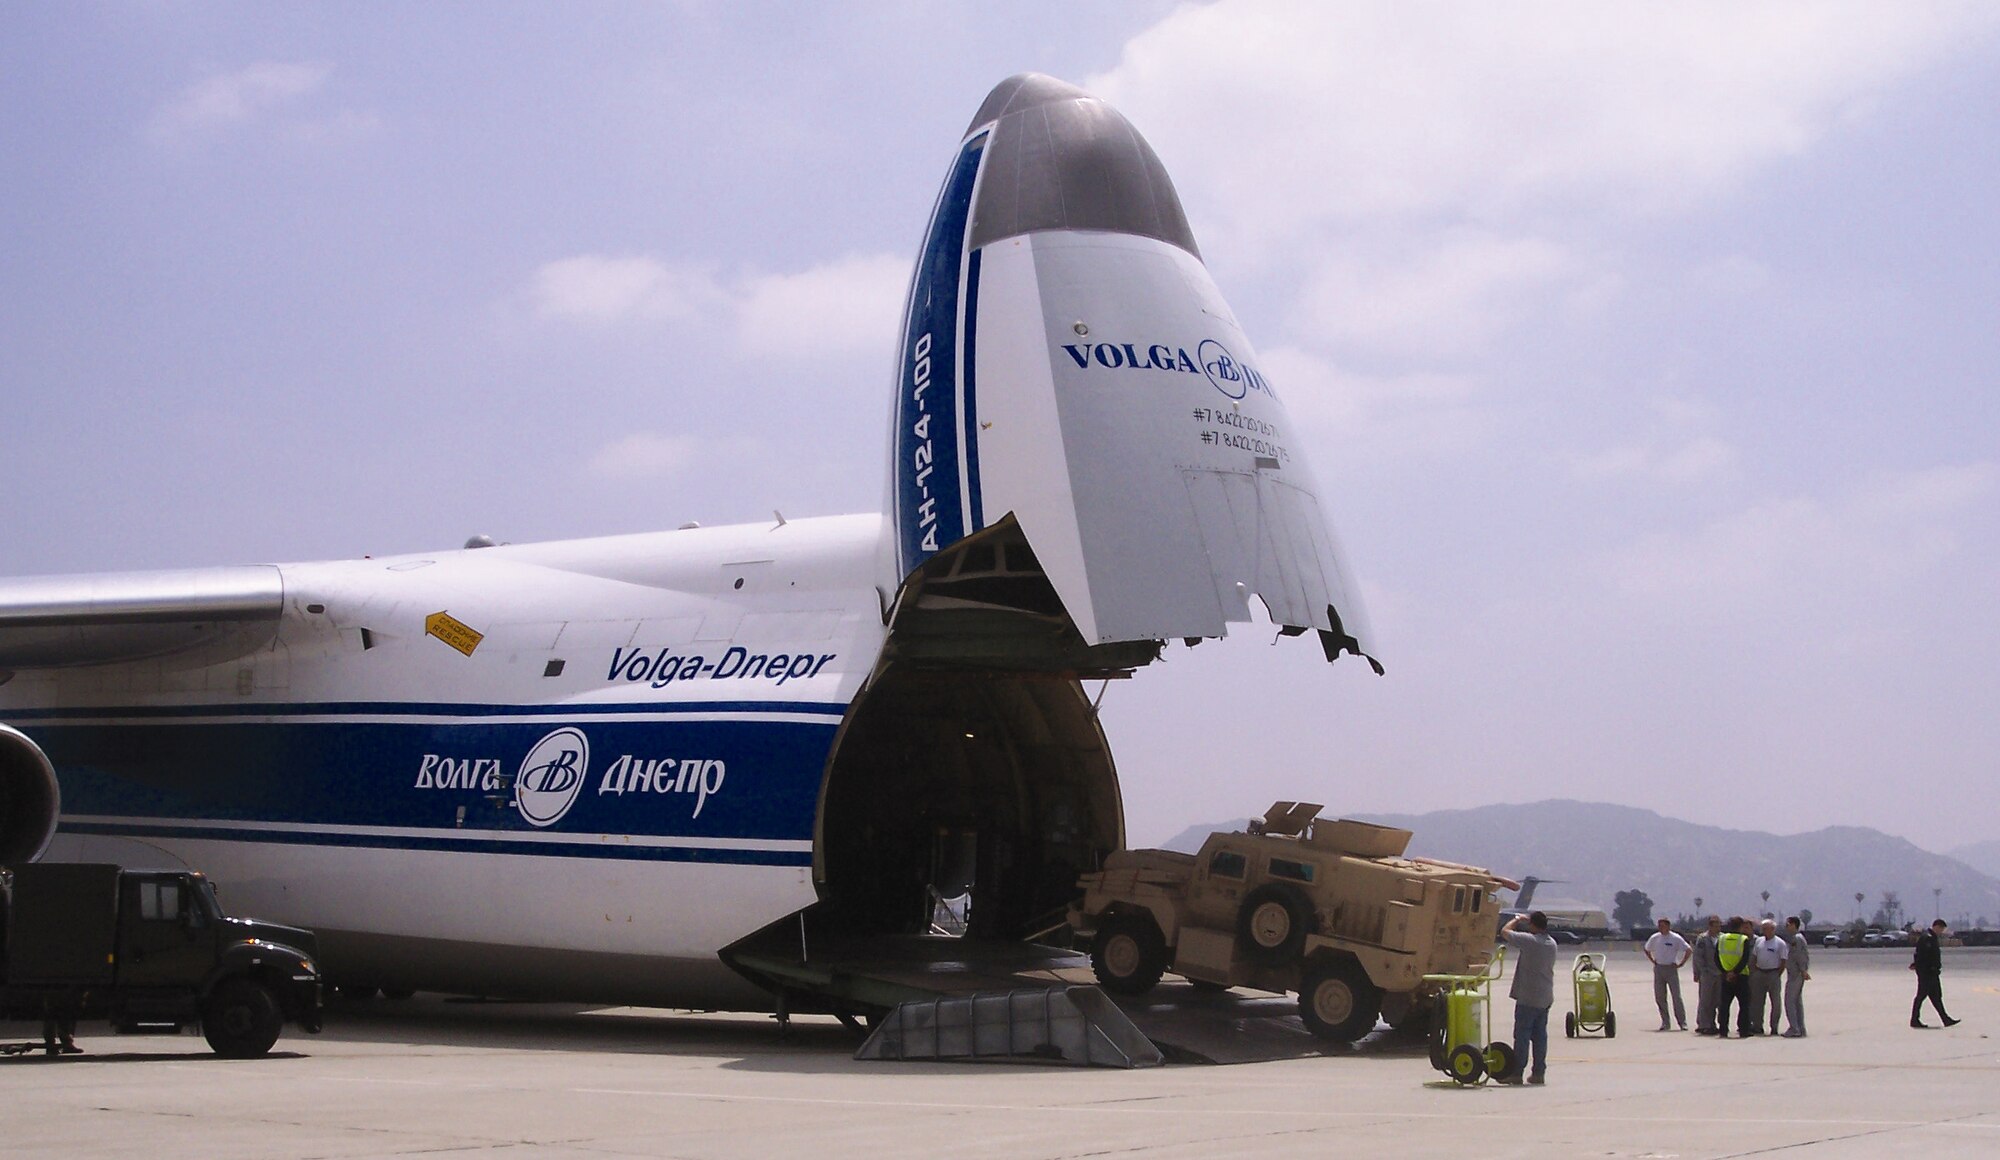 With coordination from the 452nd Aerial Port Support Flight, on May 22 the Antonov An-124 Ruslan, NATO reporting name Condor, uploads Joint Explosives Ordnance Disposal Rapid Response Vehicles (JERRVs) from Force Protection, Inc. here on the March flight line. The Cougar is a 12 ton mine protected armored patrol vehicle that has been used extensively to counter the Improvised Explosives Device (IED) threat in Iraq. Since the vehicle was first deployed in 2003, not a single Soldier or Marine has been killed while patrolling in a Cougar, despite more than 1,000 IED attacks on the vehicles. The 12-person APSF team is currently tasked to support the deployments and redeployments of Operations Enduring Freedom and Iraqi Freedom for all branches of services and agencies based in the Southern California region. (U.S. Air Force photo by Master Sgt. Philip Cheng)